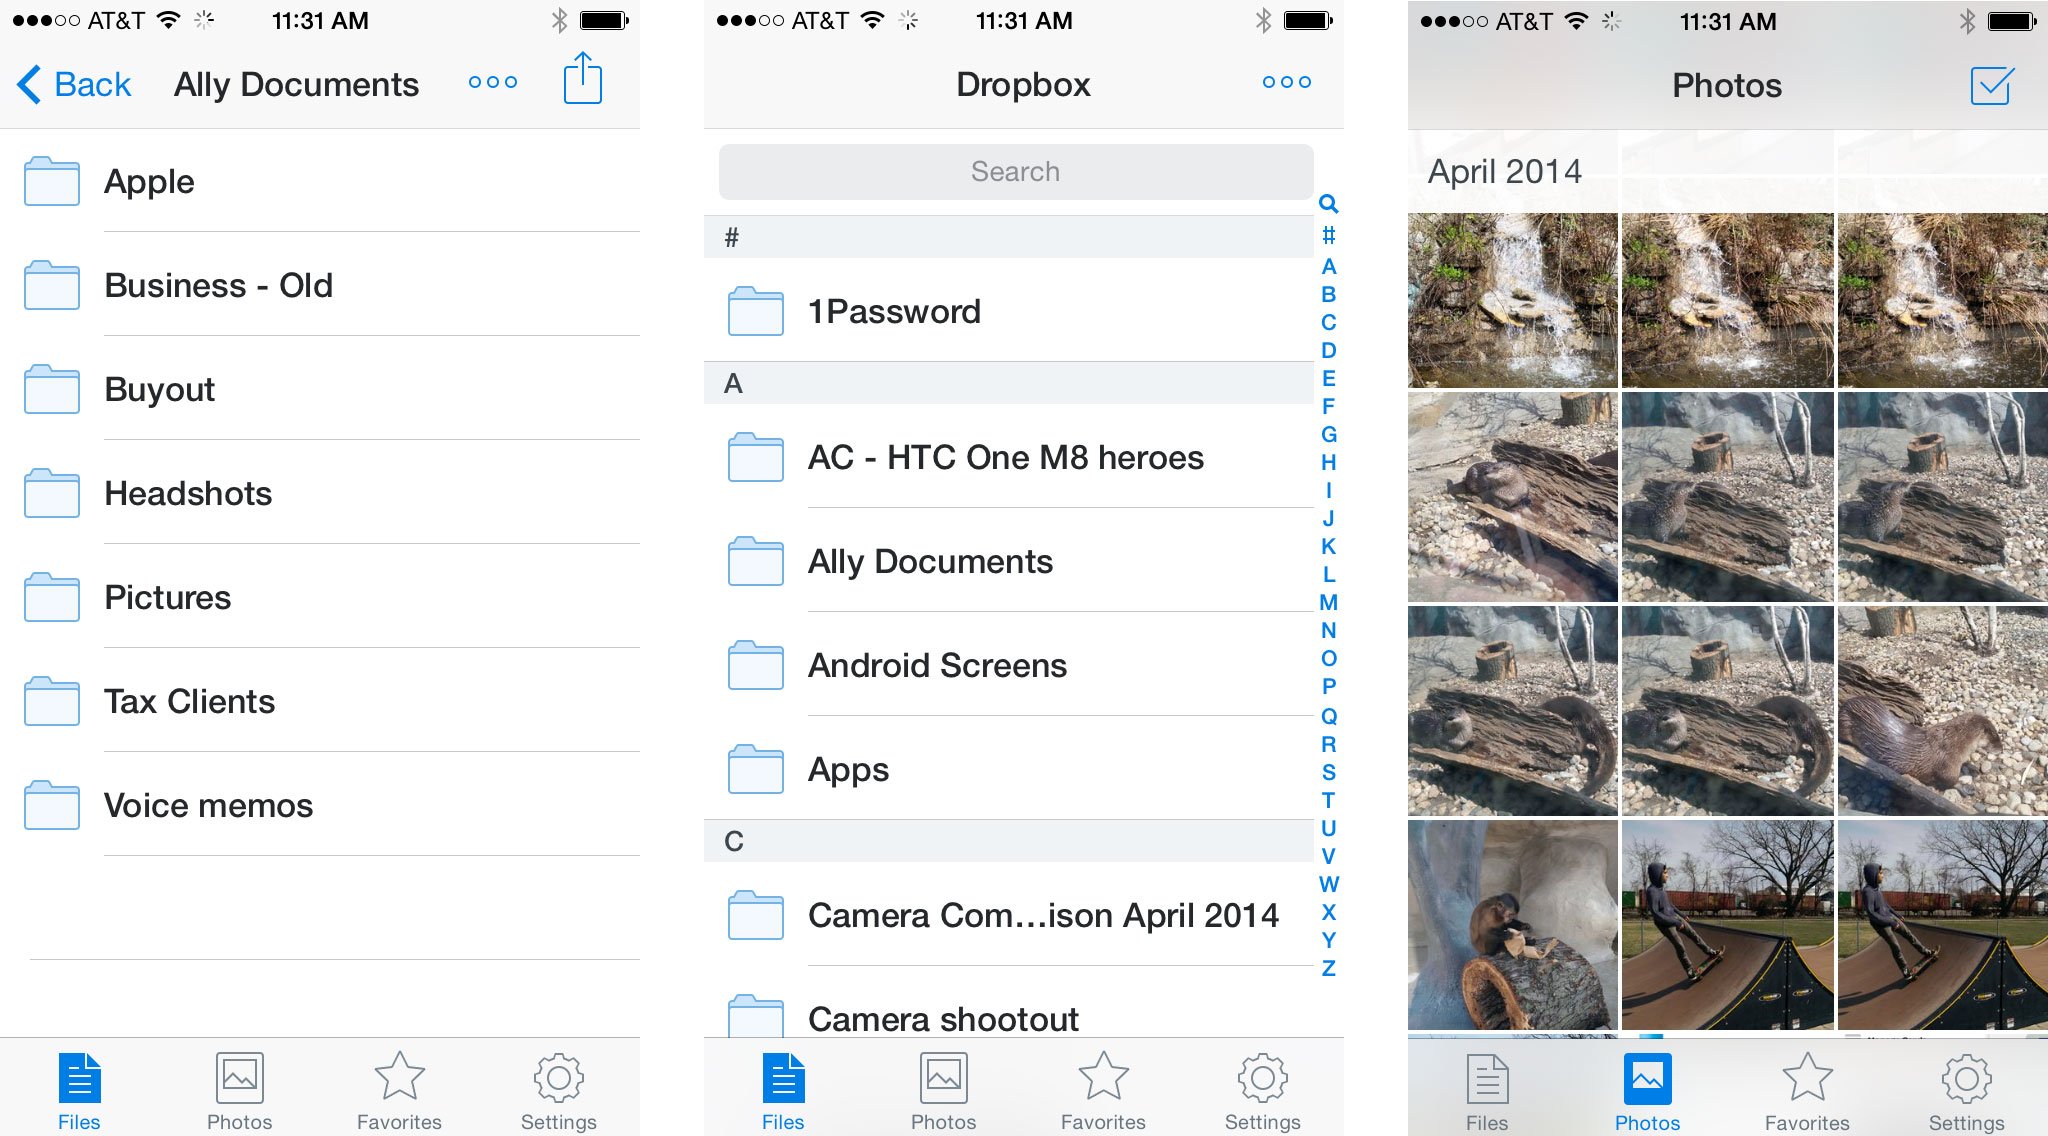 Best apps for accountants and CPAs: Dropbox